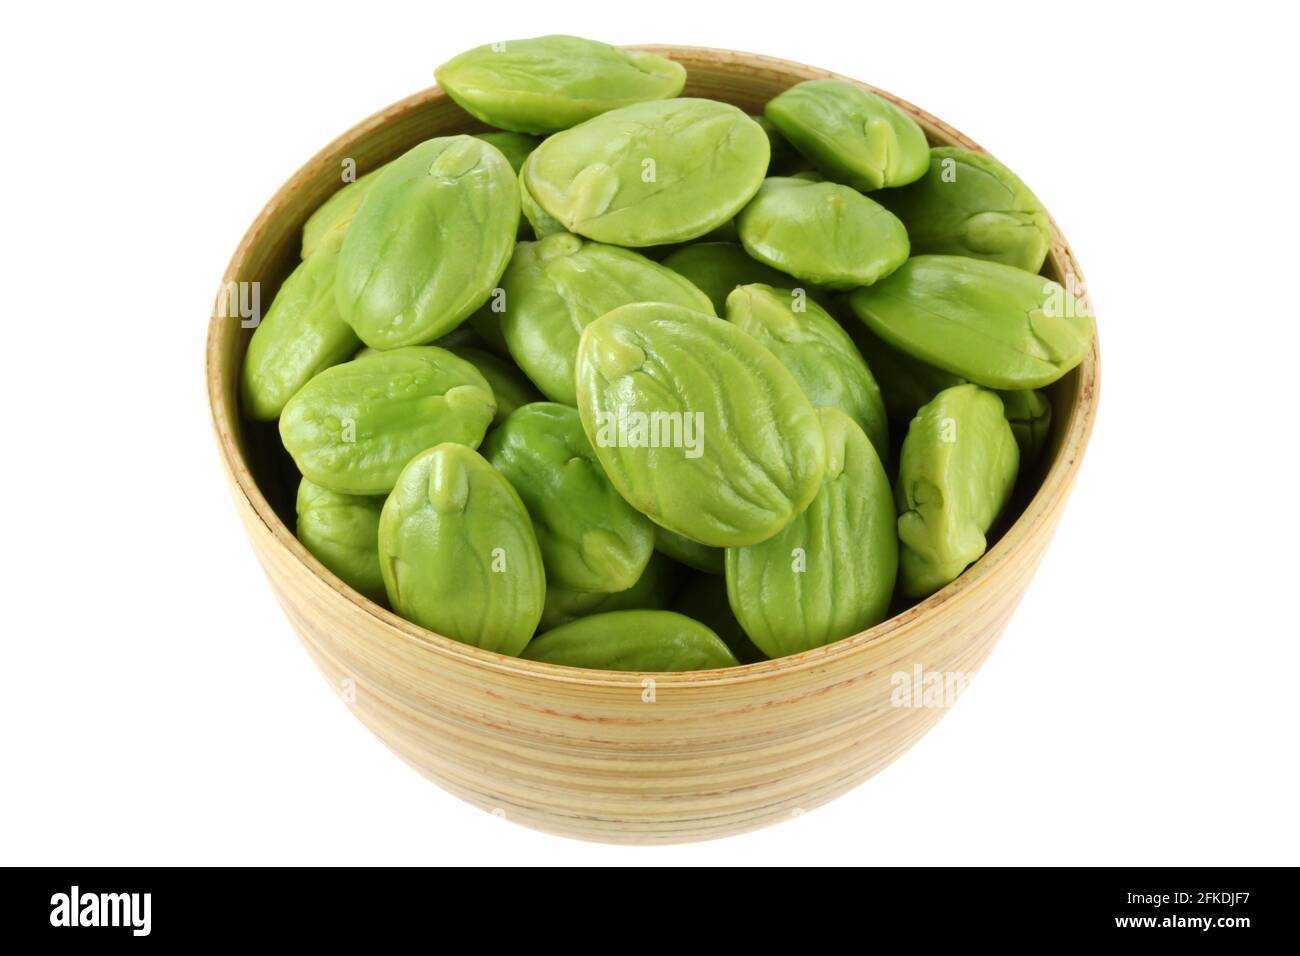 A Bowl of Stink Bean (Parkia speciosa, Bitter bean), isolated on white background Stock Photo